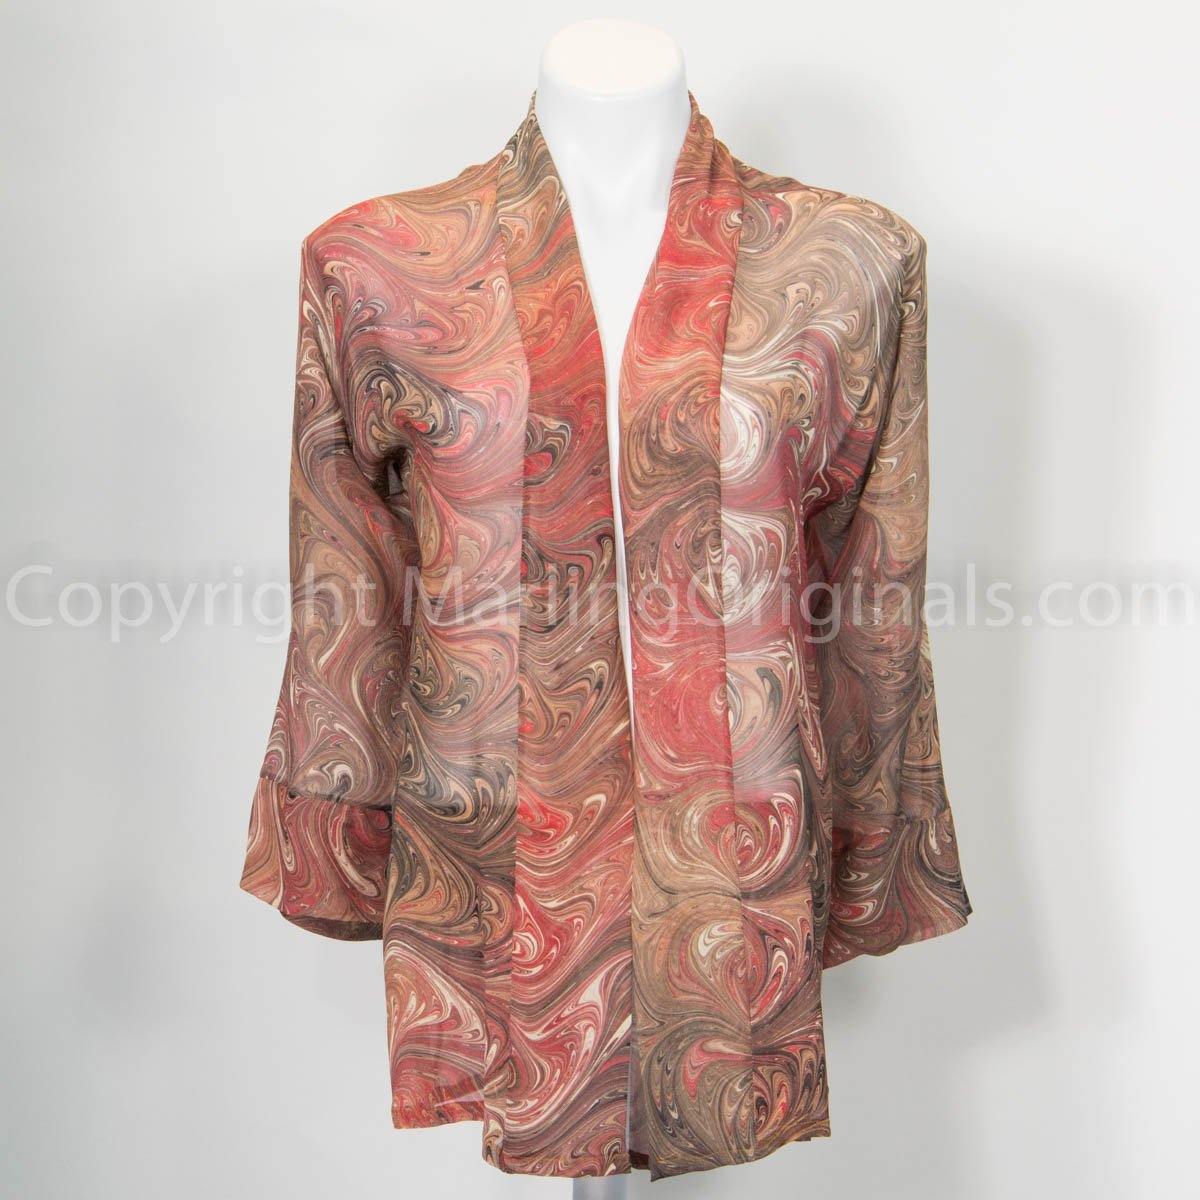 Sheer silk kimono marbled in coral and salmon tones.  Banded front, cuffed elbow-length sleeves.